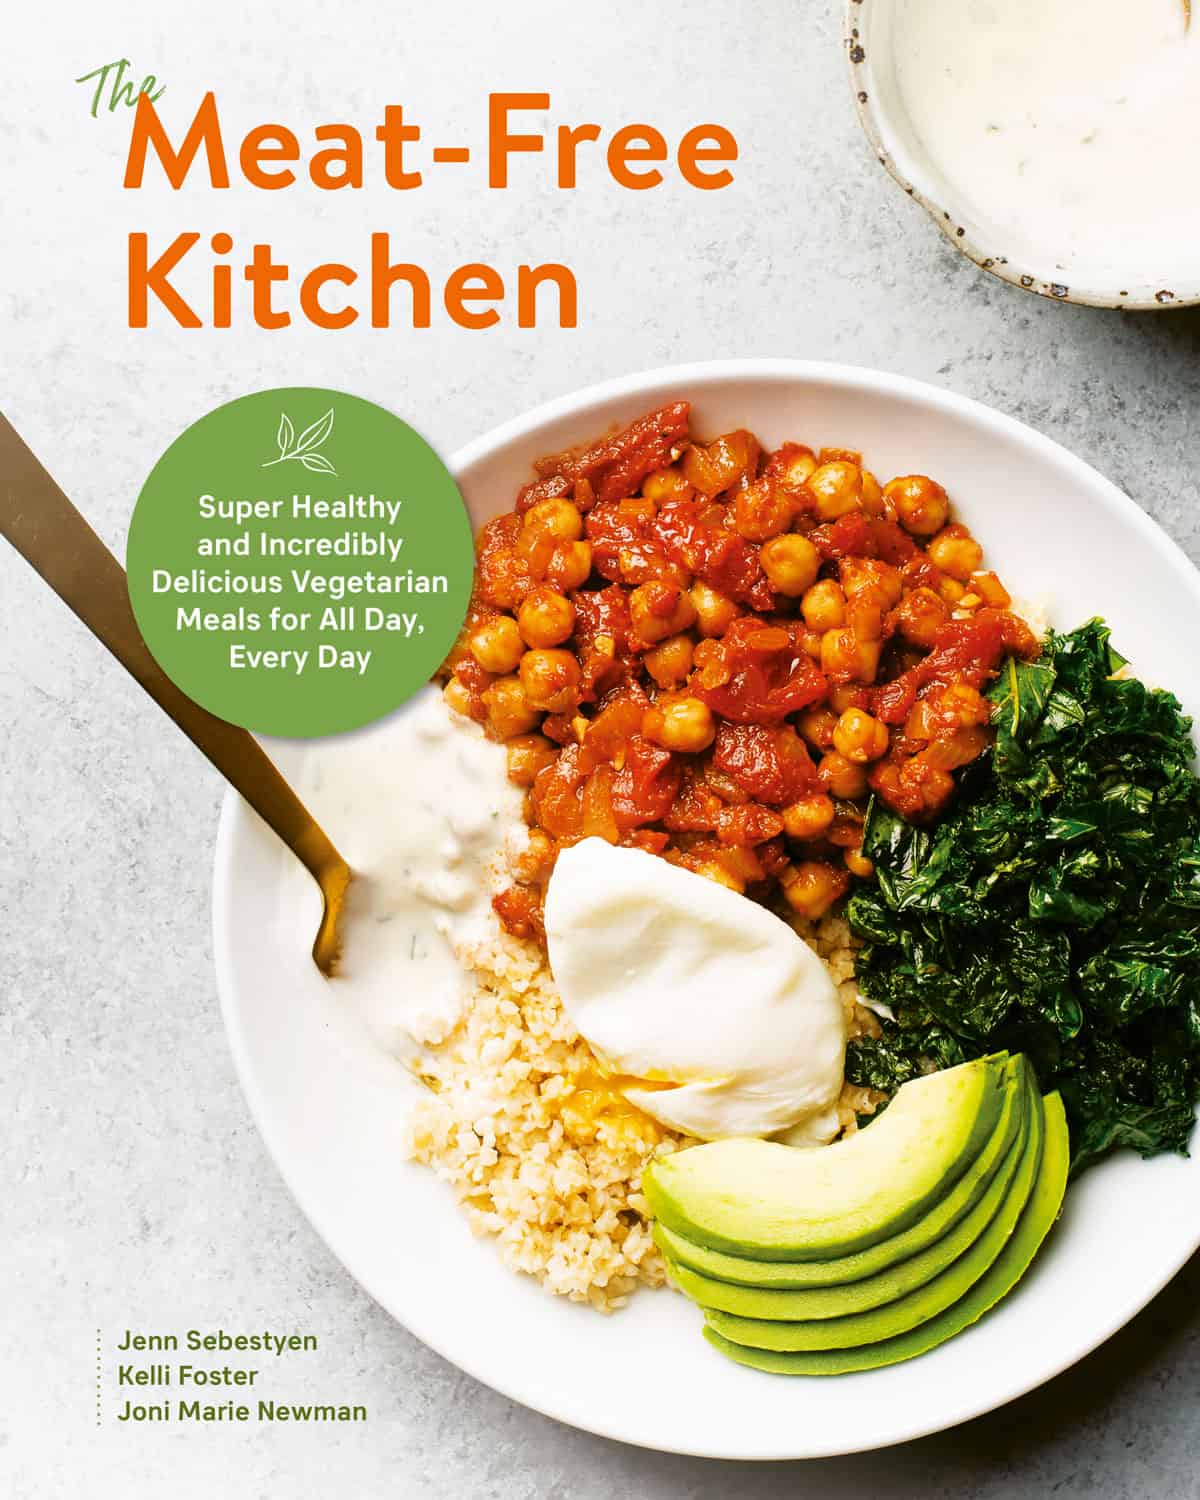 The Meat-Free Kitchen Cookbook COver